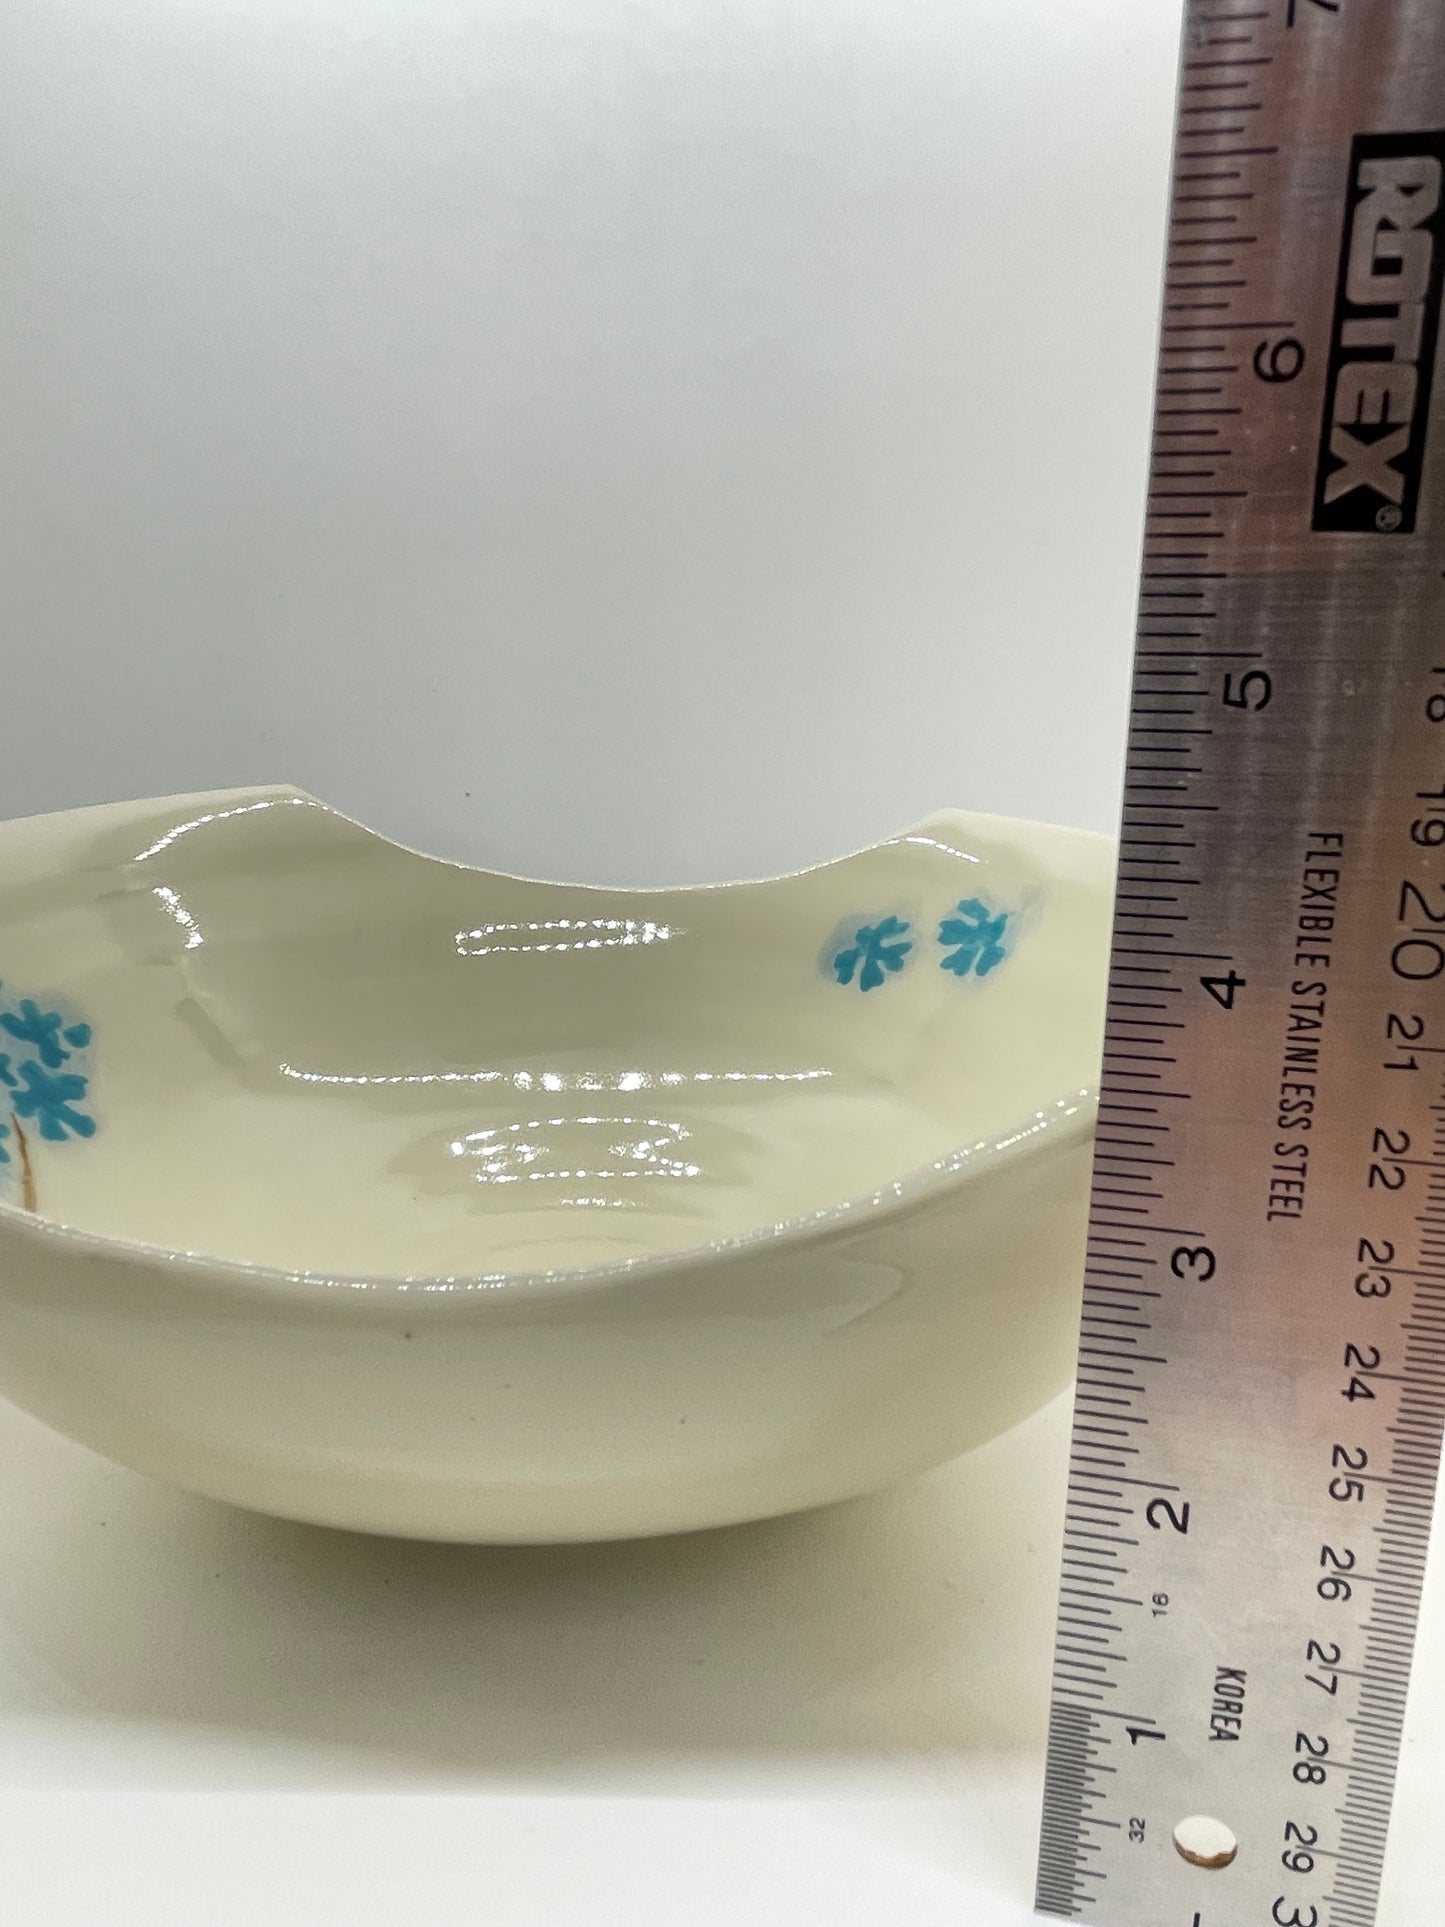 White with Blue Hydrangea Serving Bowl